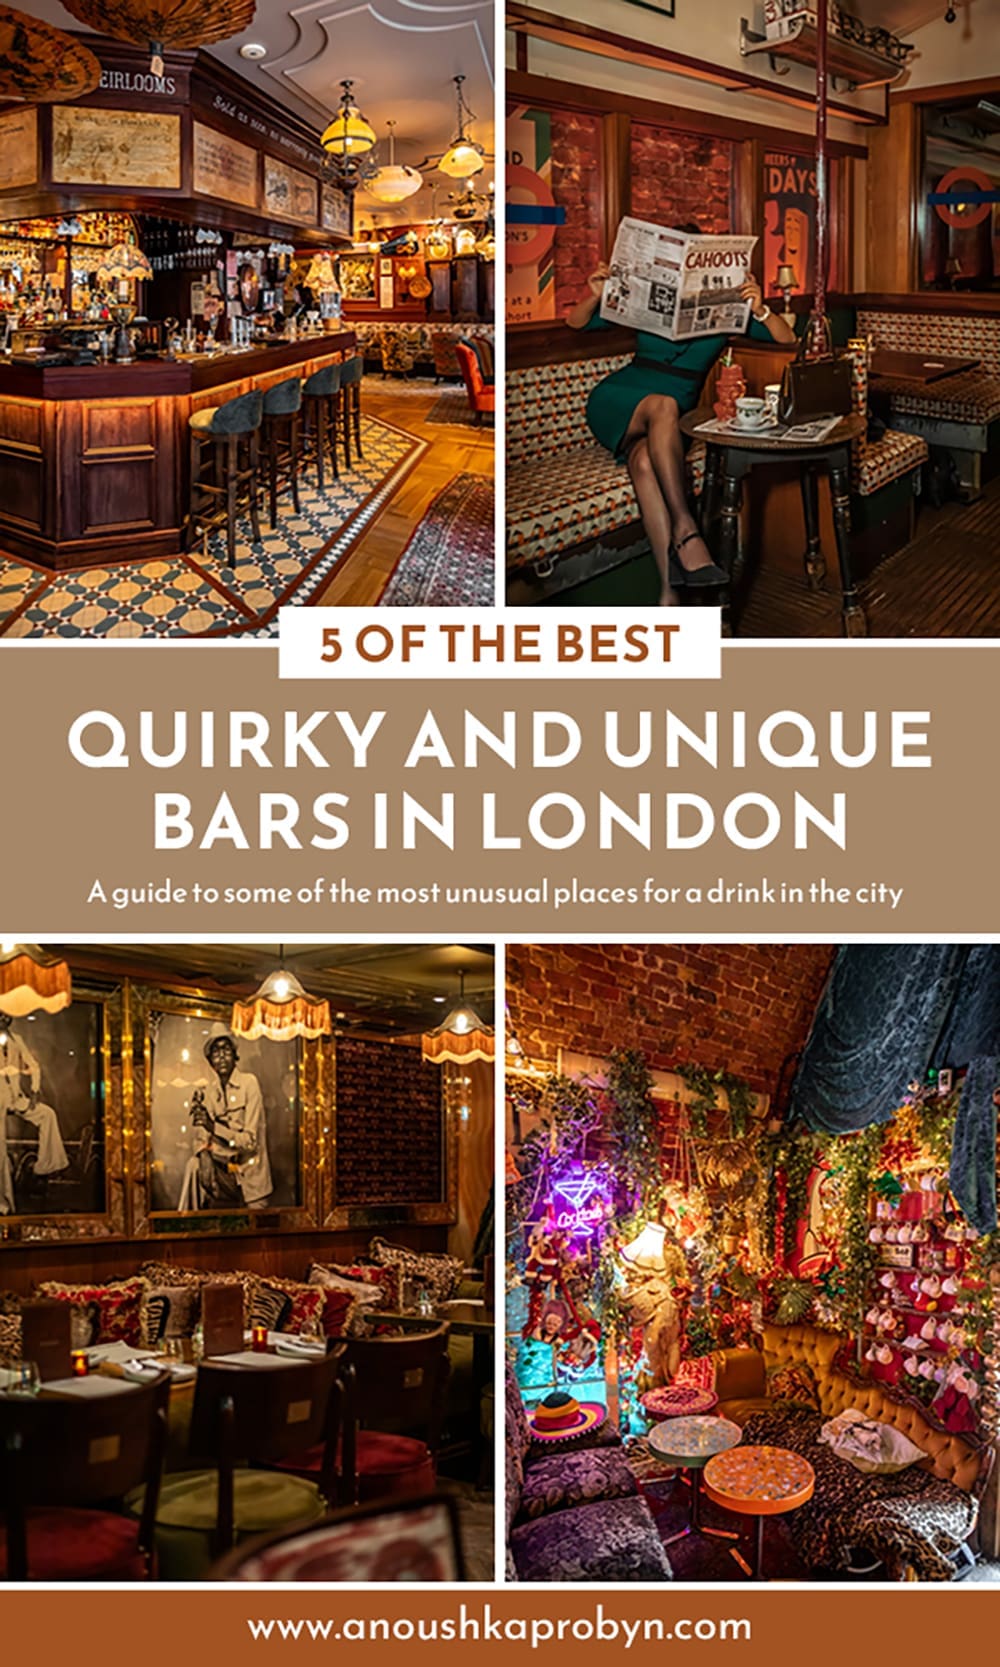 5 Quirky Bars in London